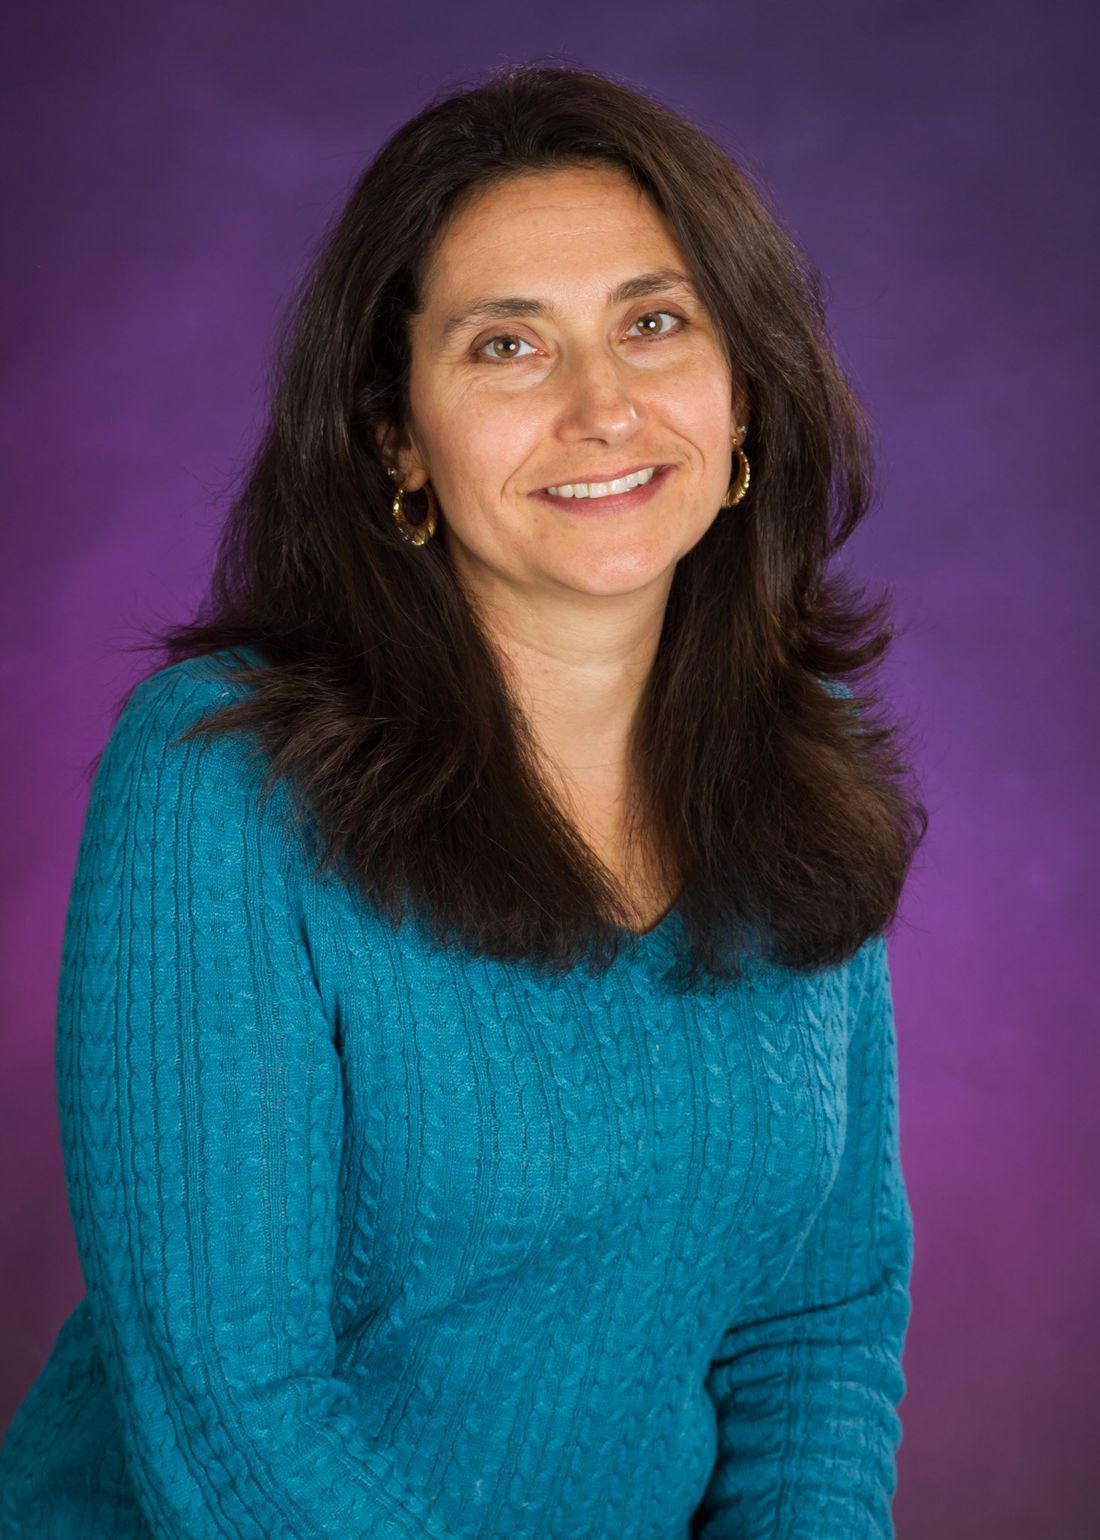 A studio portrait of a woman in a blue sweater against a purple background